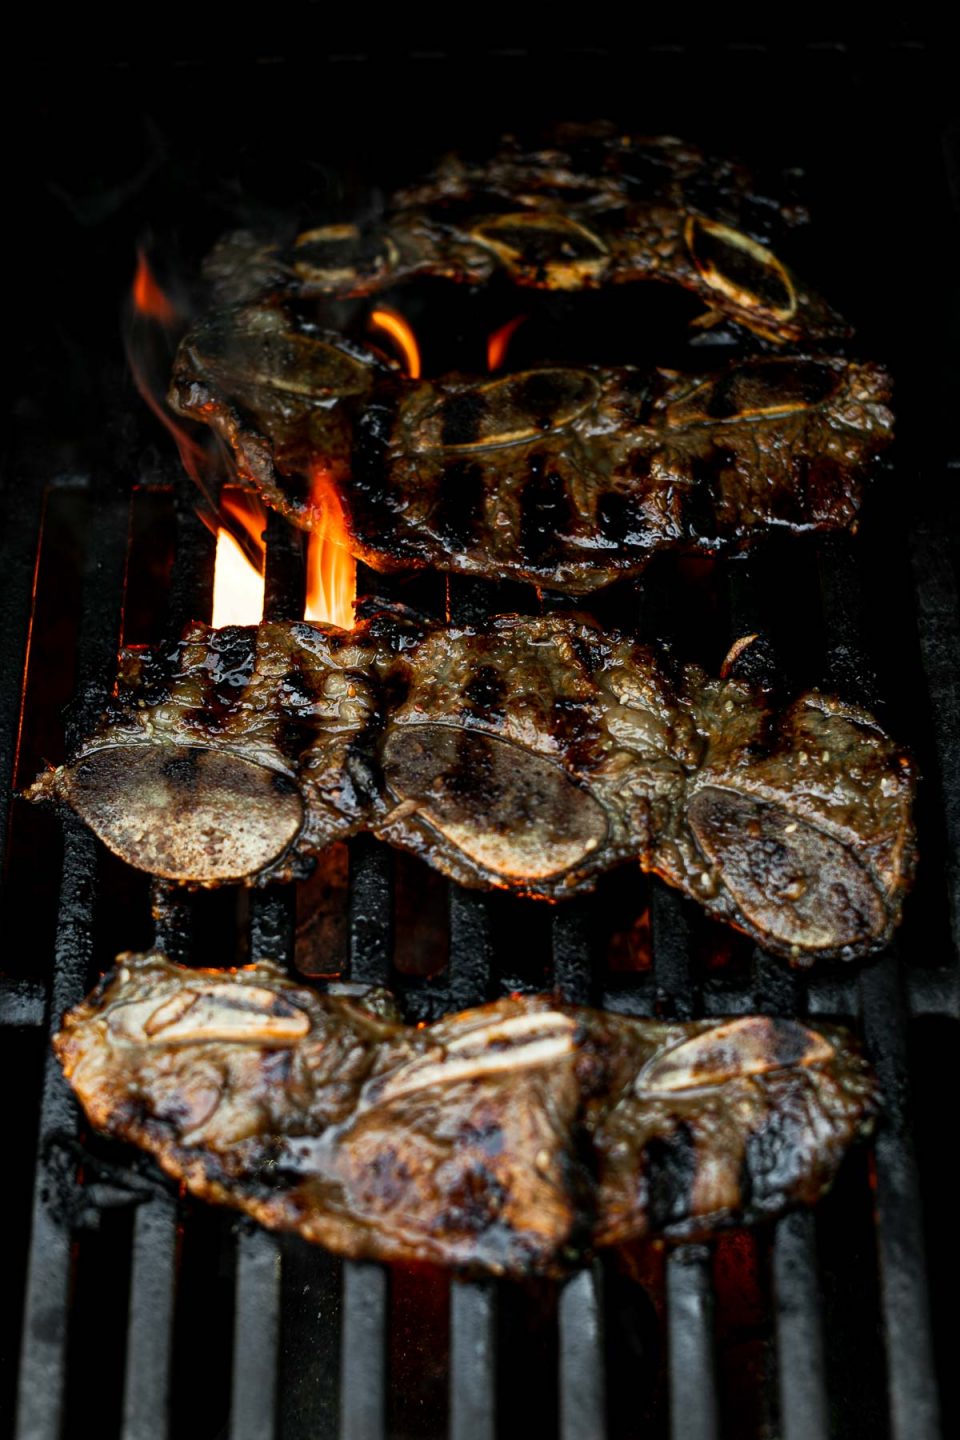 Korean beef short ribs on grill grates, grilling over direct flame.